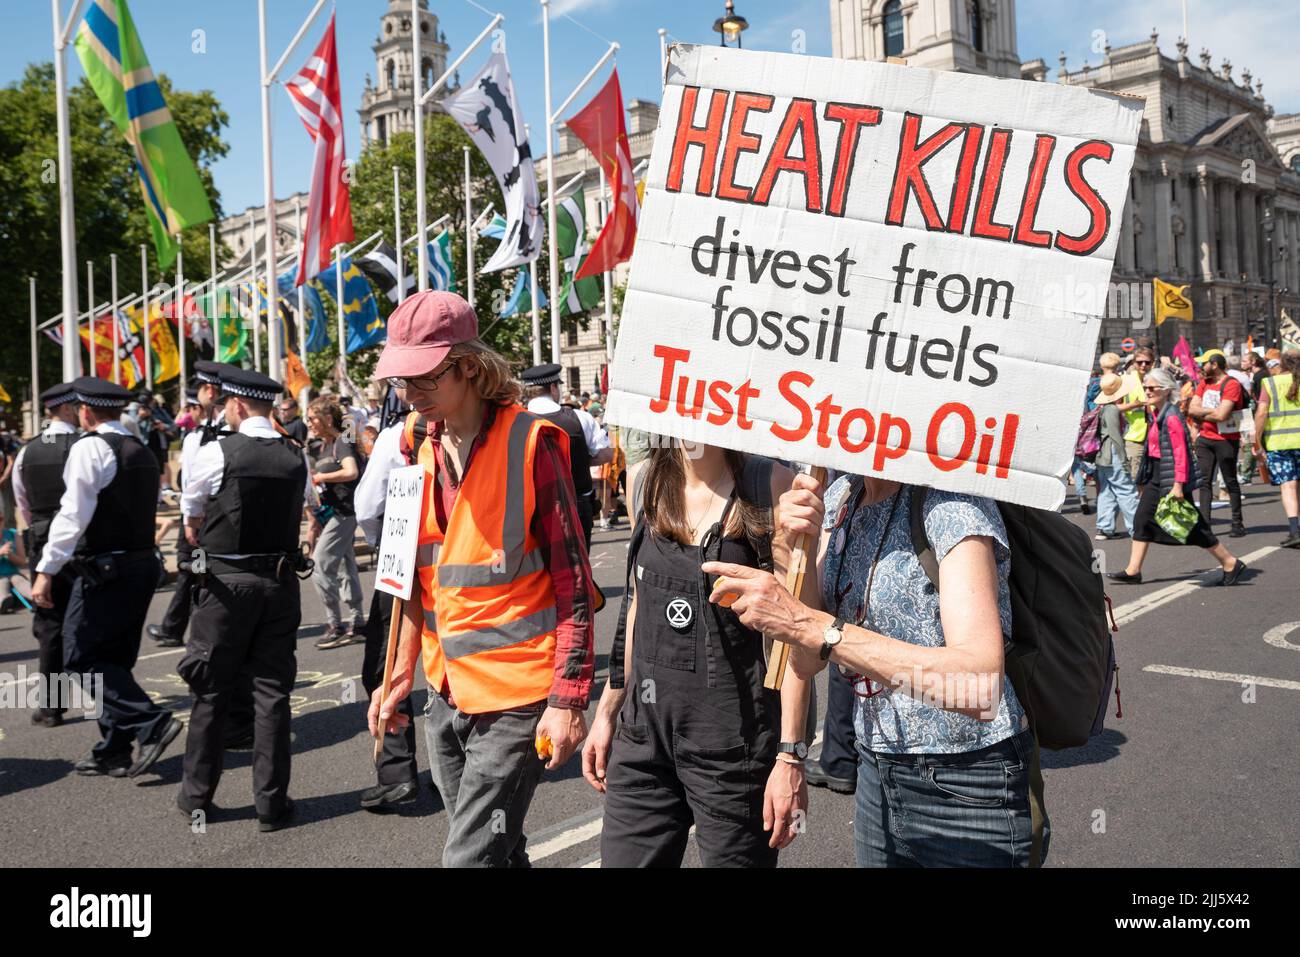 London, UK. 23rd July 2022. We All Want To Just Stop Oil Coalition: National March & Sit Down. One of many marches that converged upon Westminster. Protesters in Parliament Square holding Heat Kills divest from fossil fuels Just Stop Oil placard. Credit: Stephen Bell/Alamy Live News Stock Photo